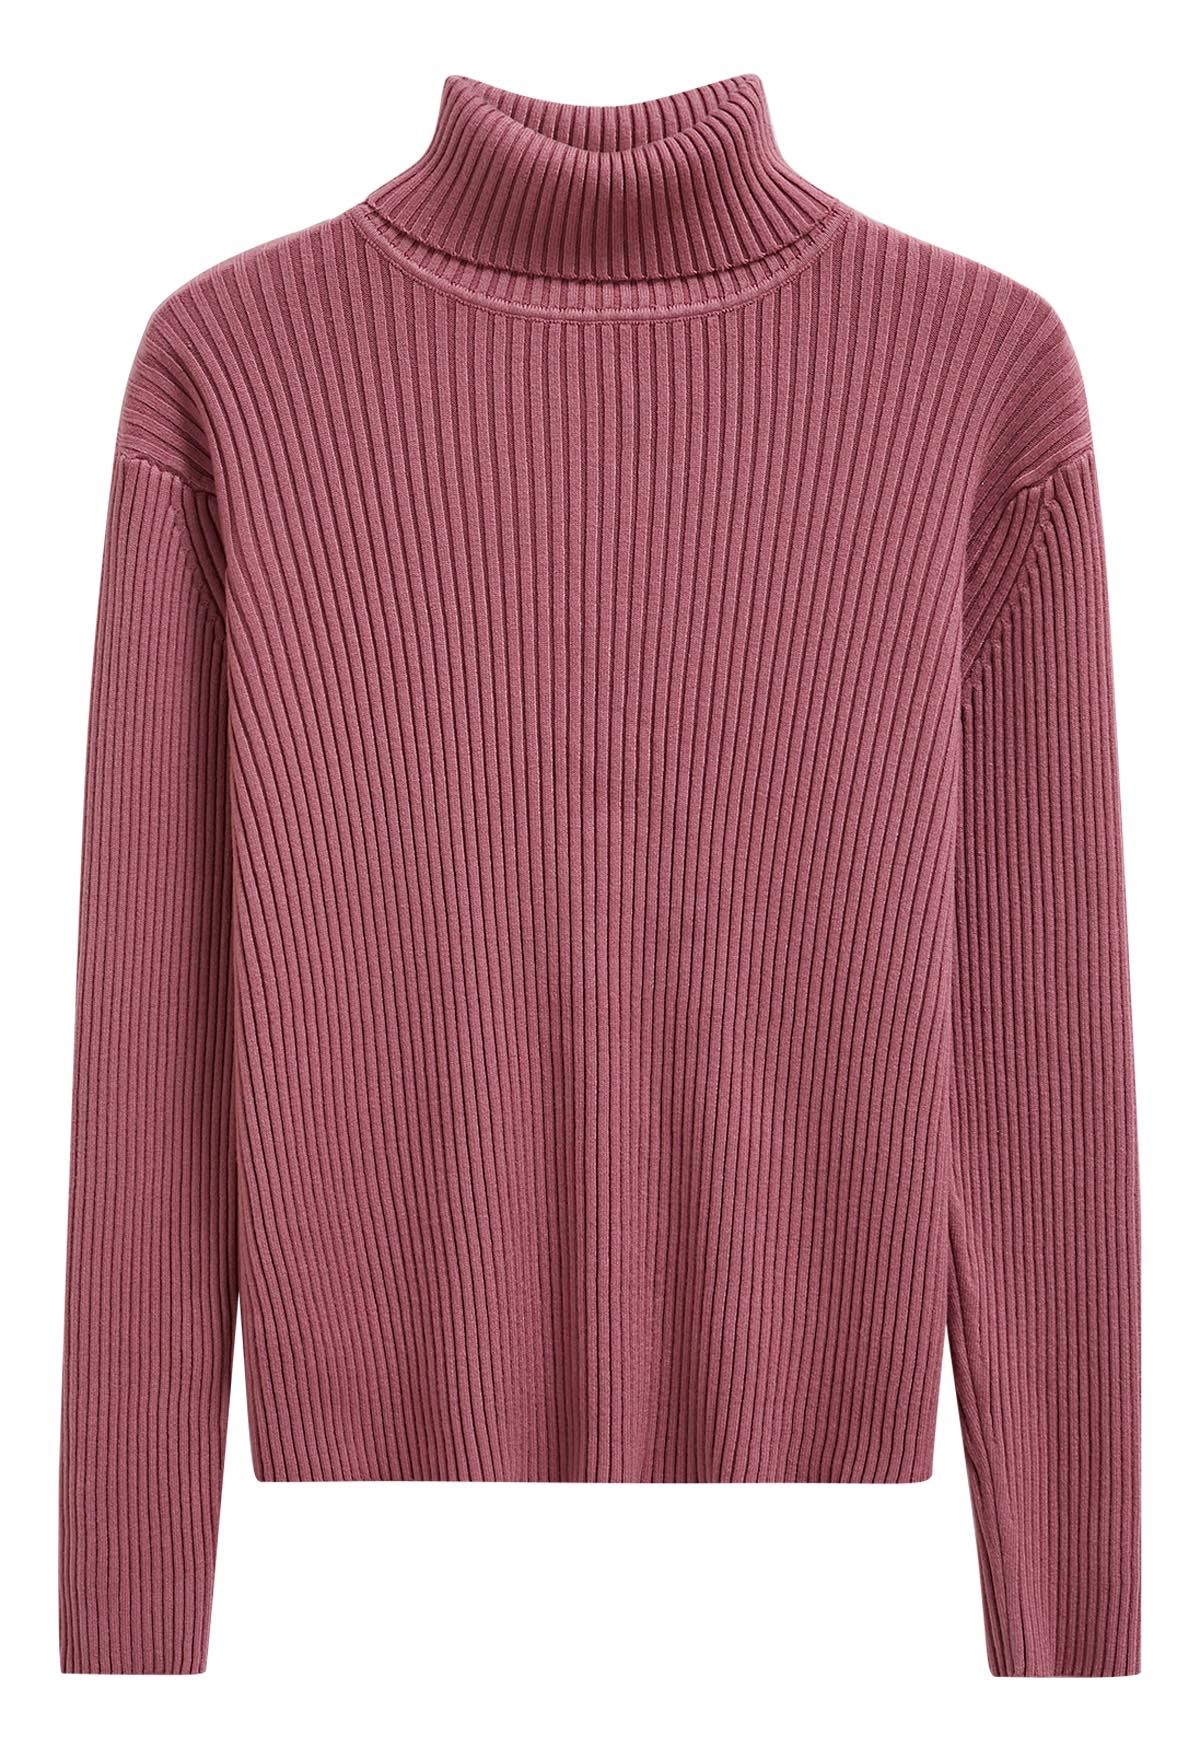 Versatile Turtleneck Ribbed Knit Sweater in Berry